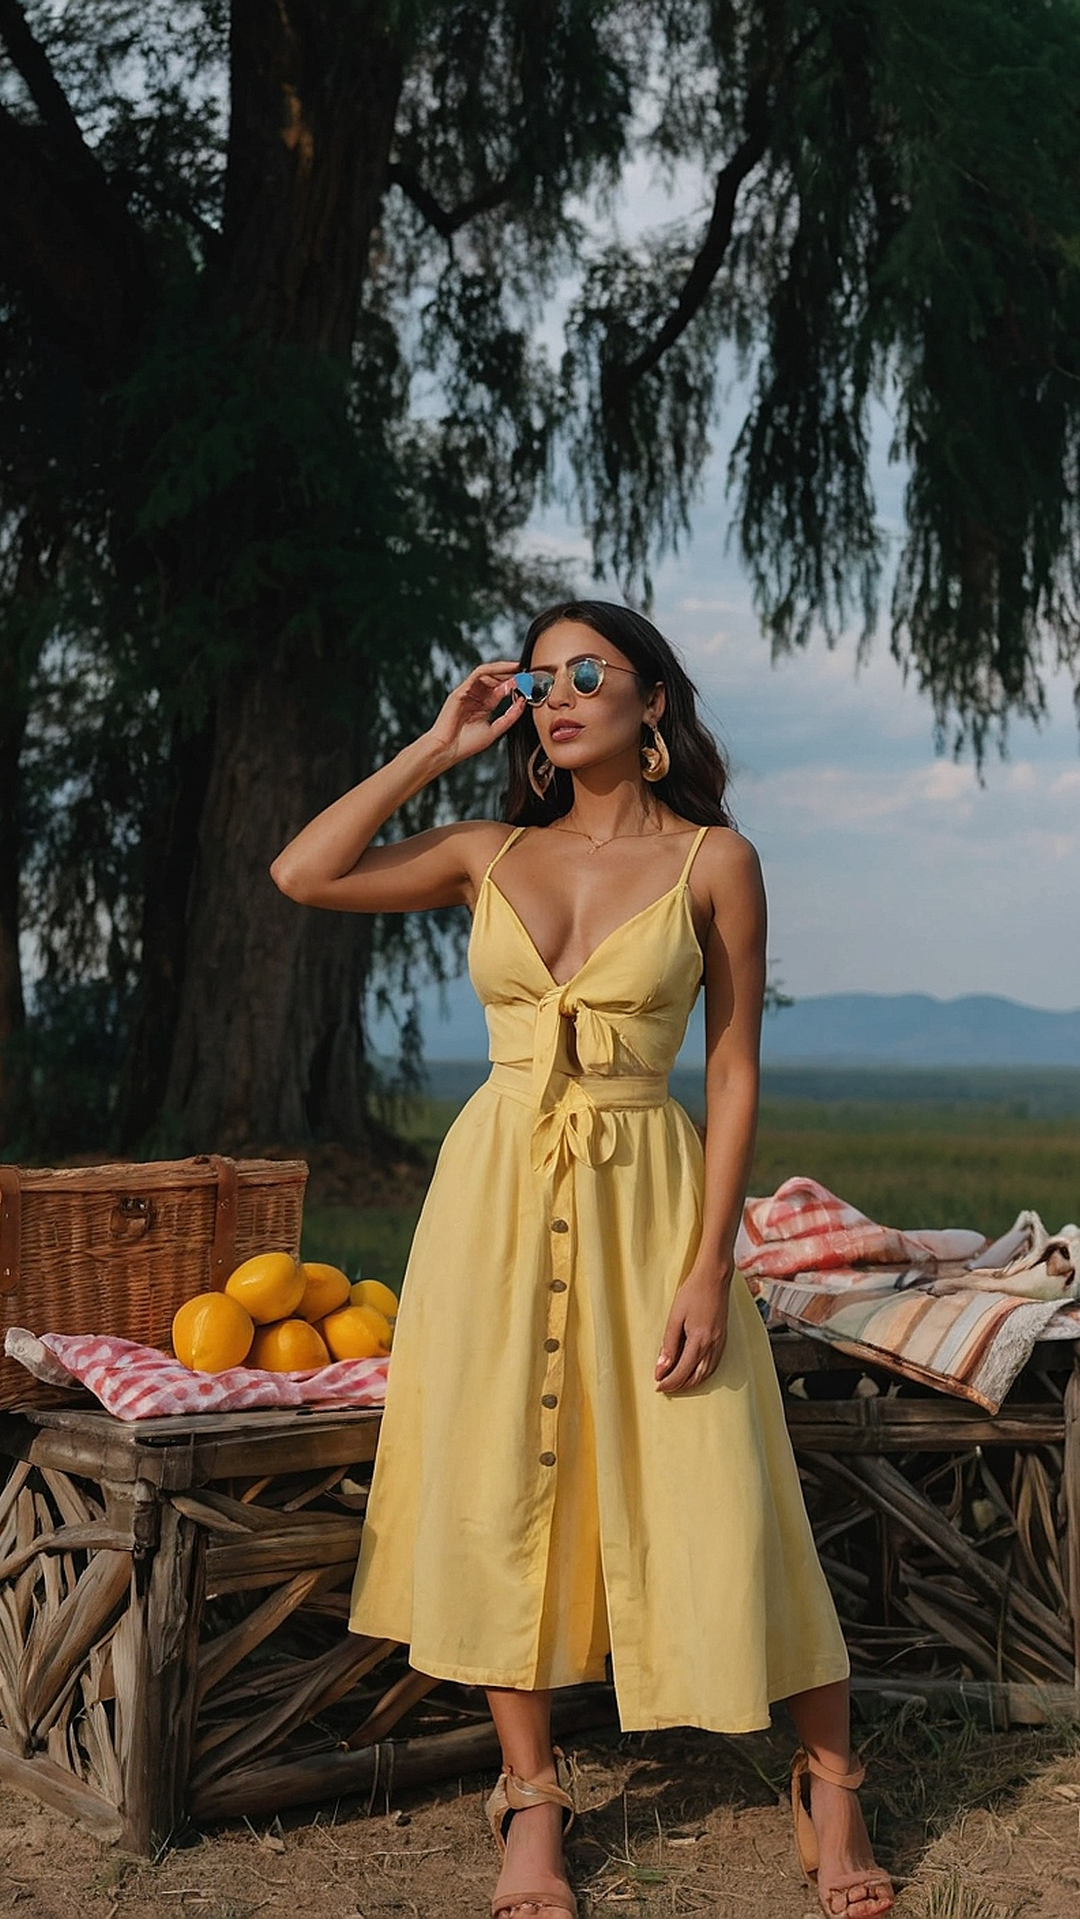 Effortlessly Chic Summer Outfit Ideas for Picnics